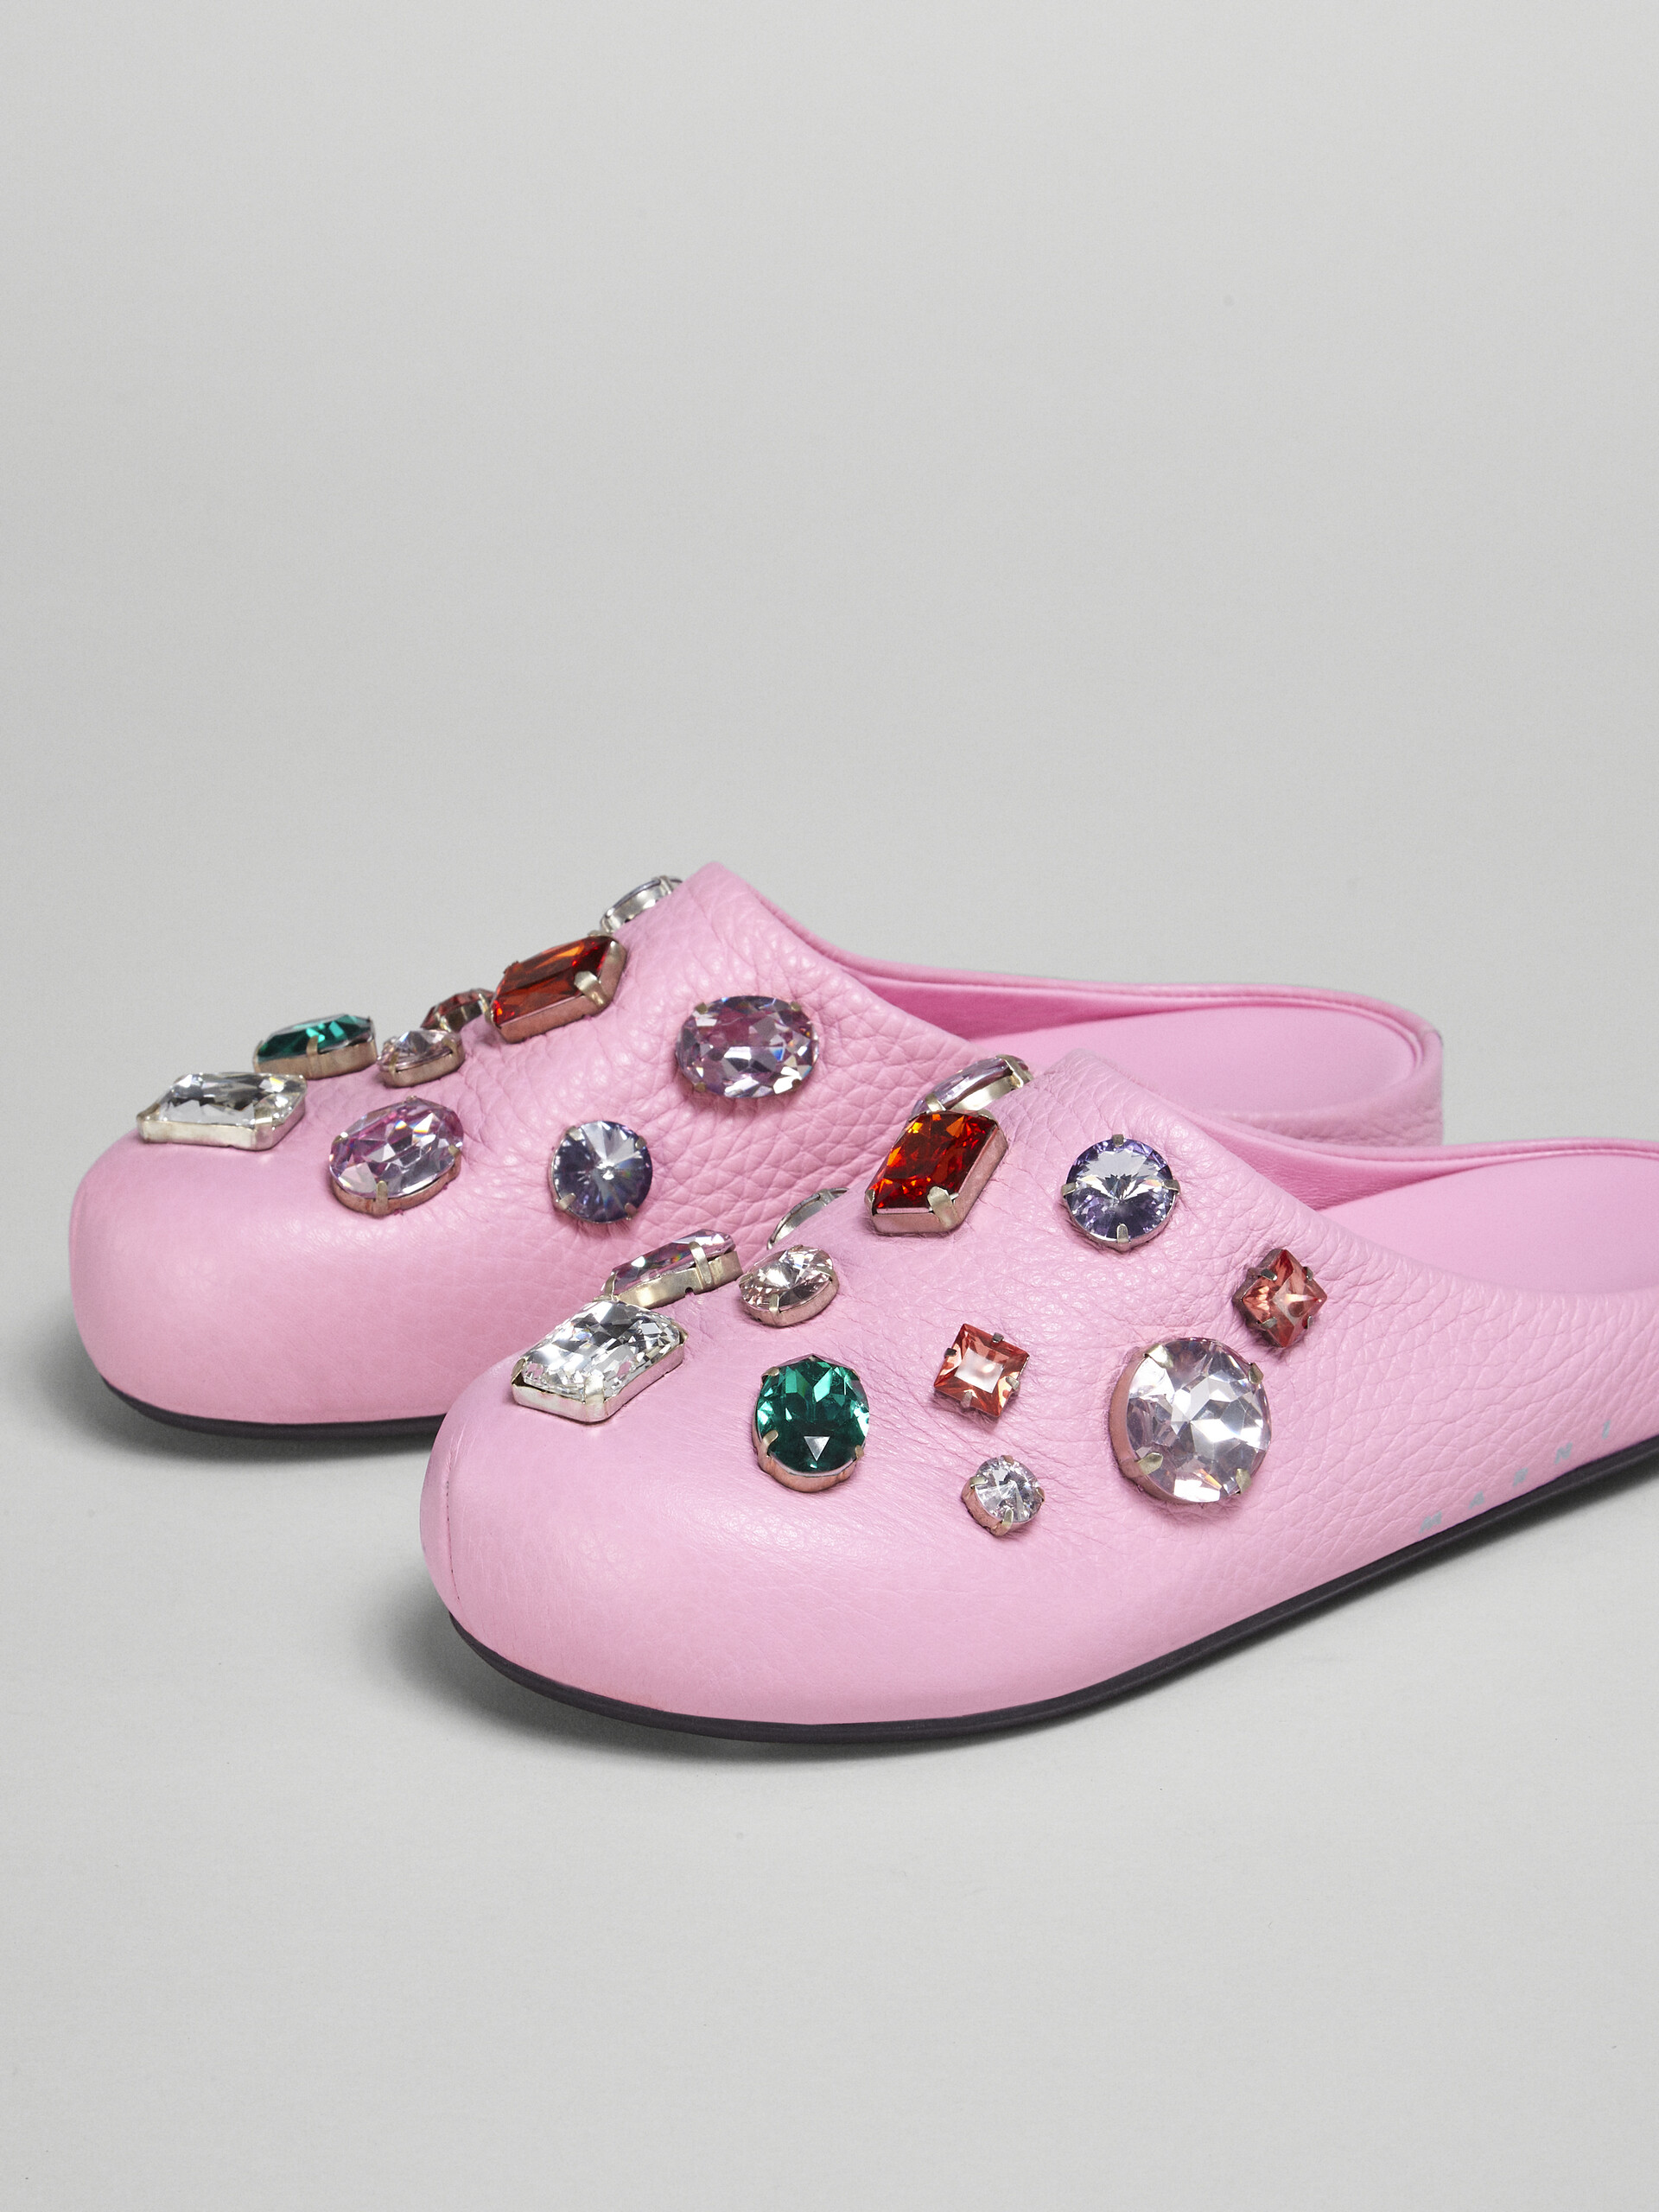 Pink leather Fussbett sabot with glass beads - Clogs - Image 5